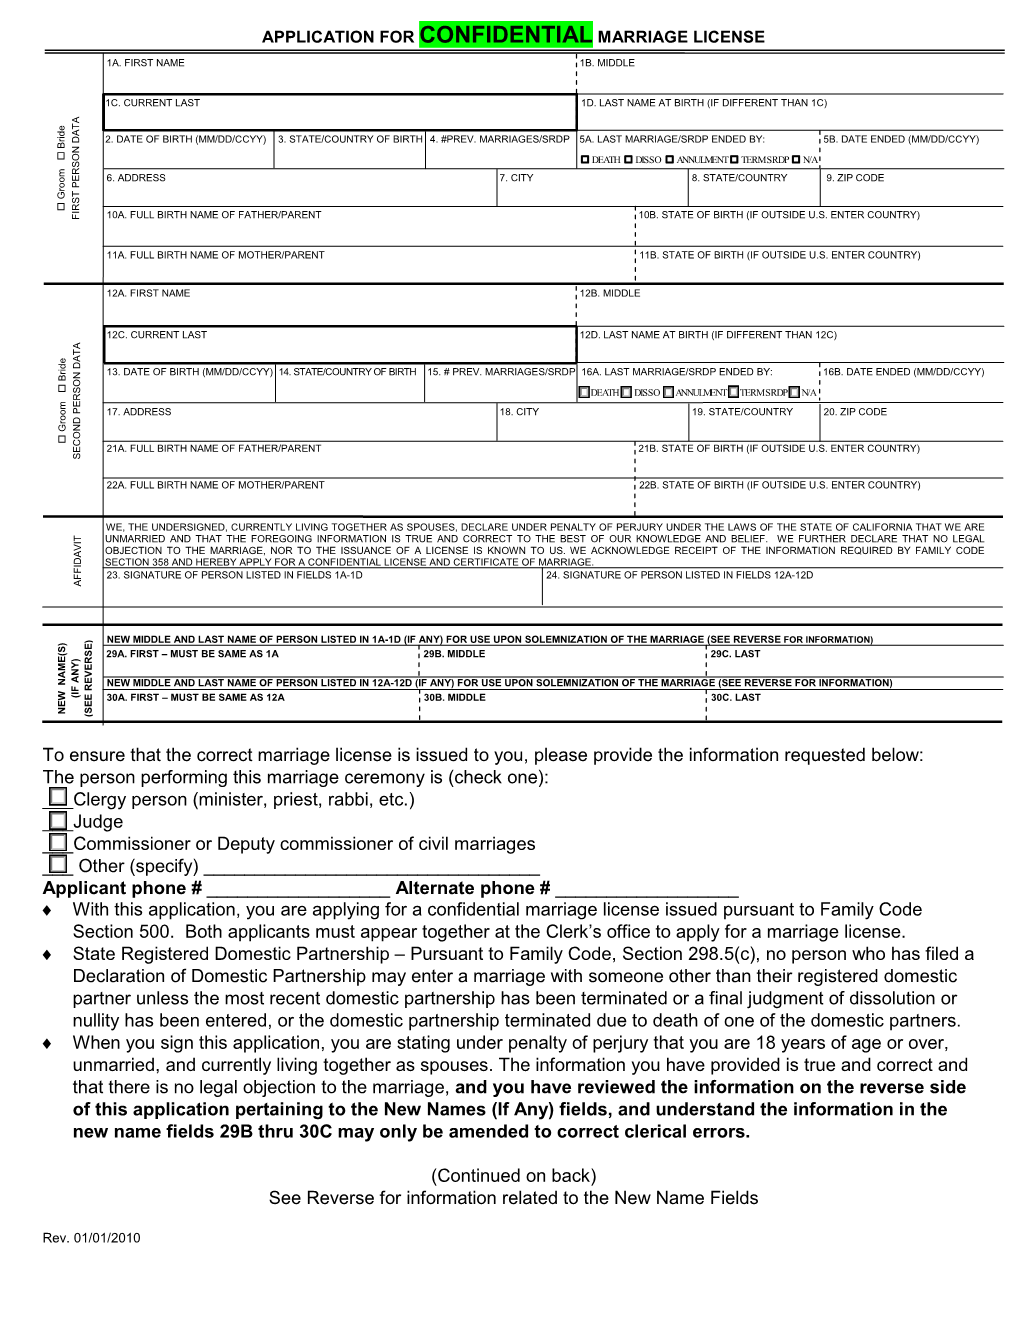 Confidential Marriage License Application